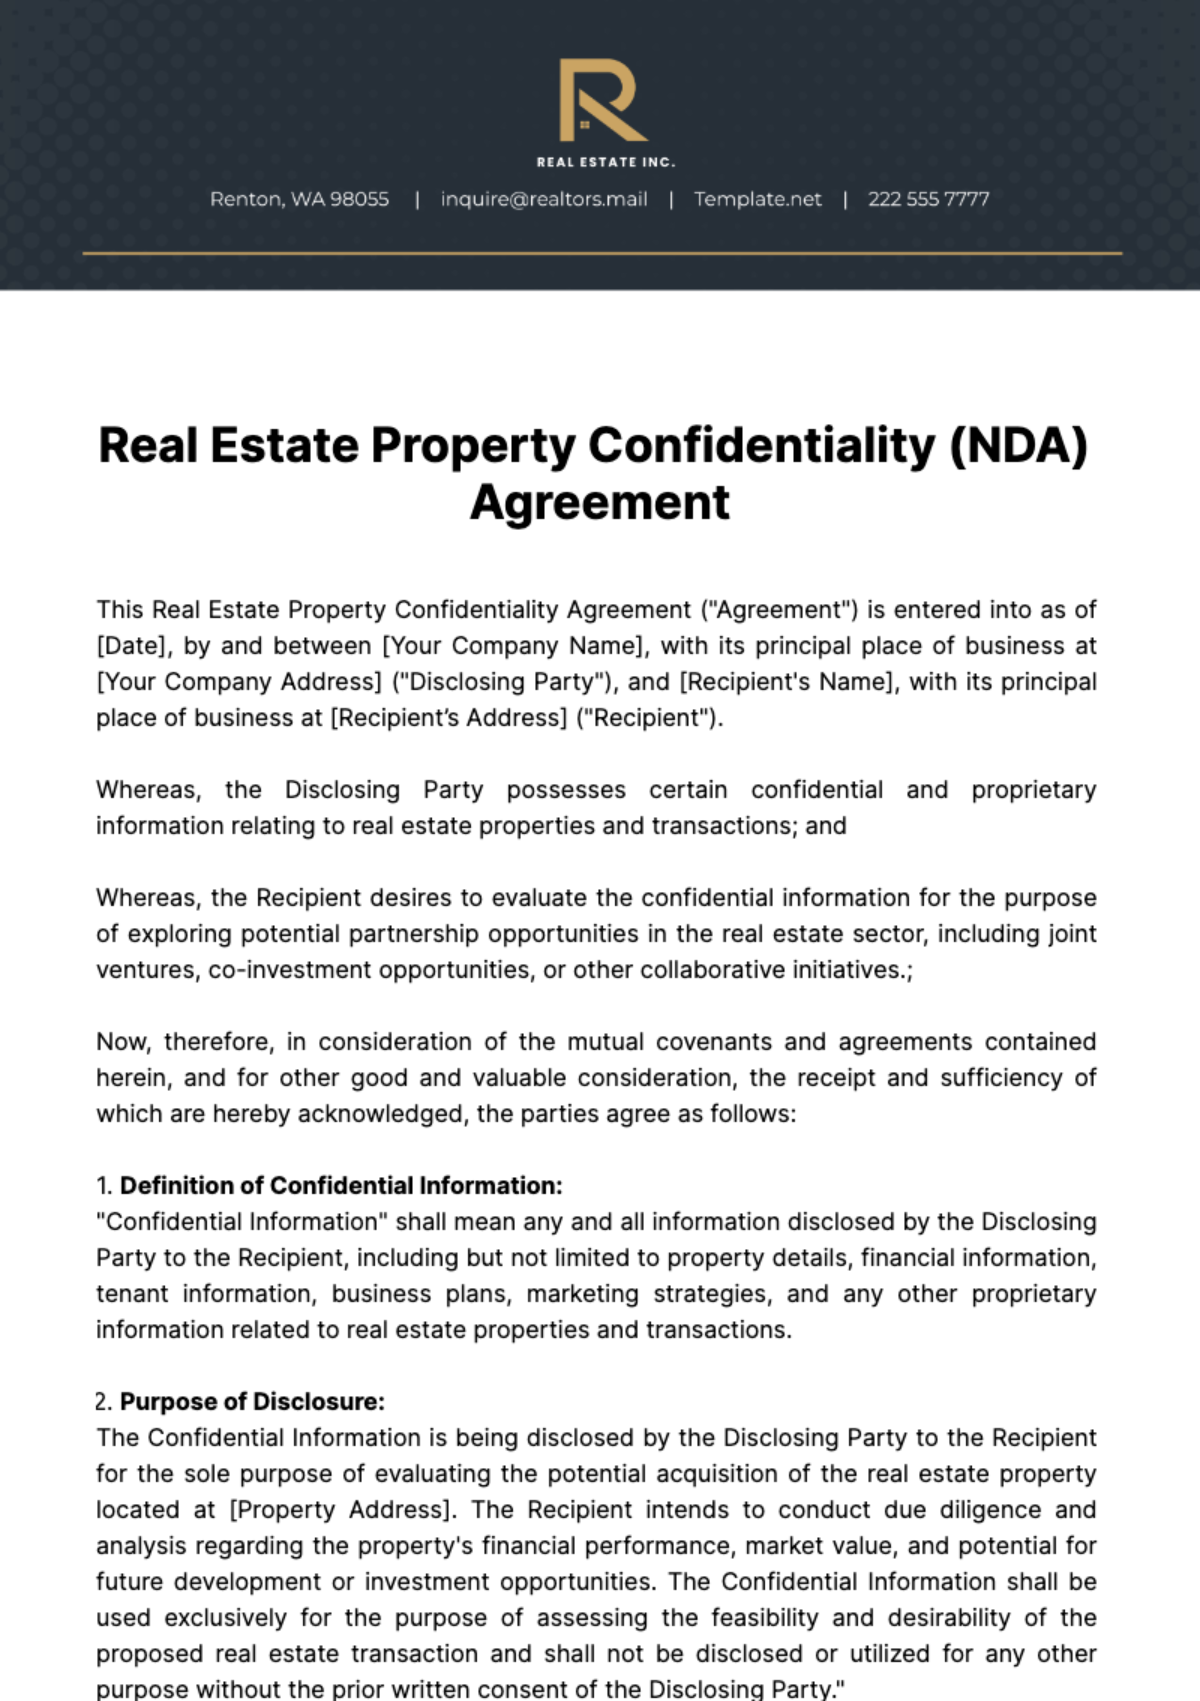 Real Estate Property Confidentiality (NDA) Agreement Template